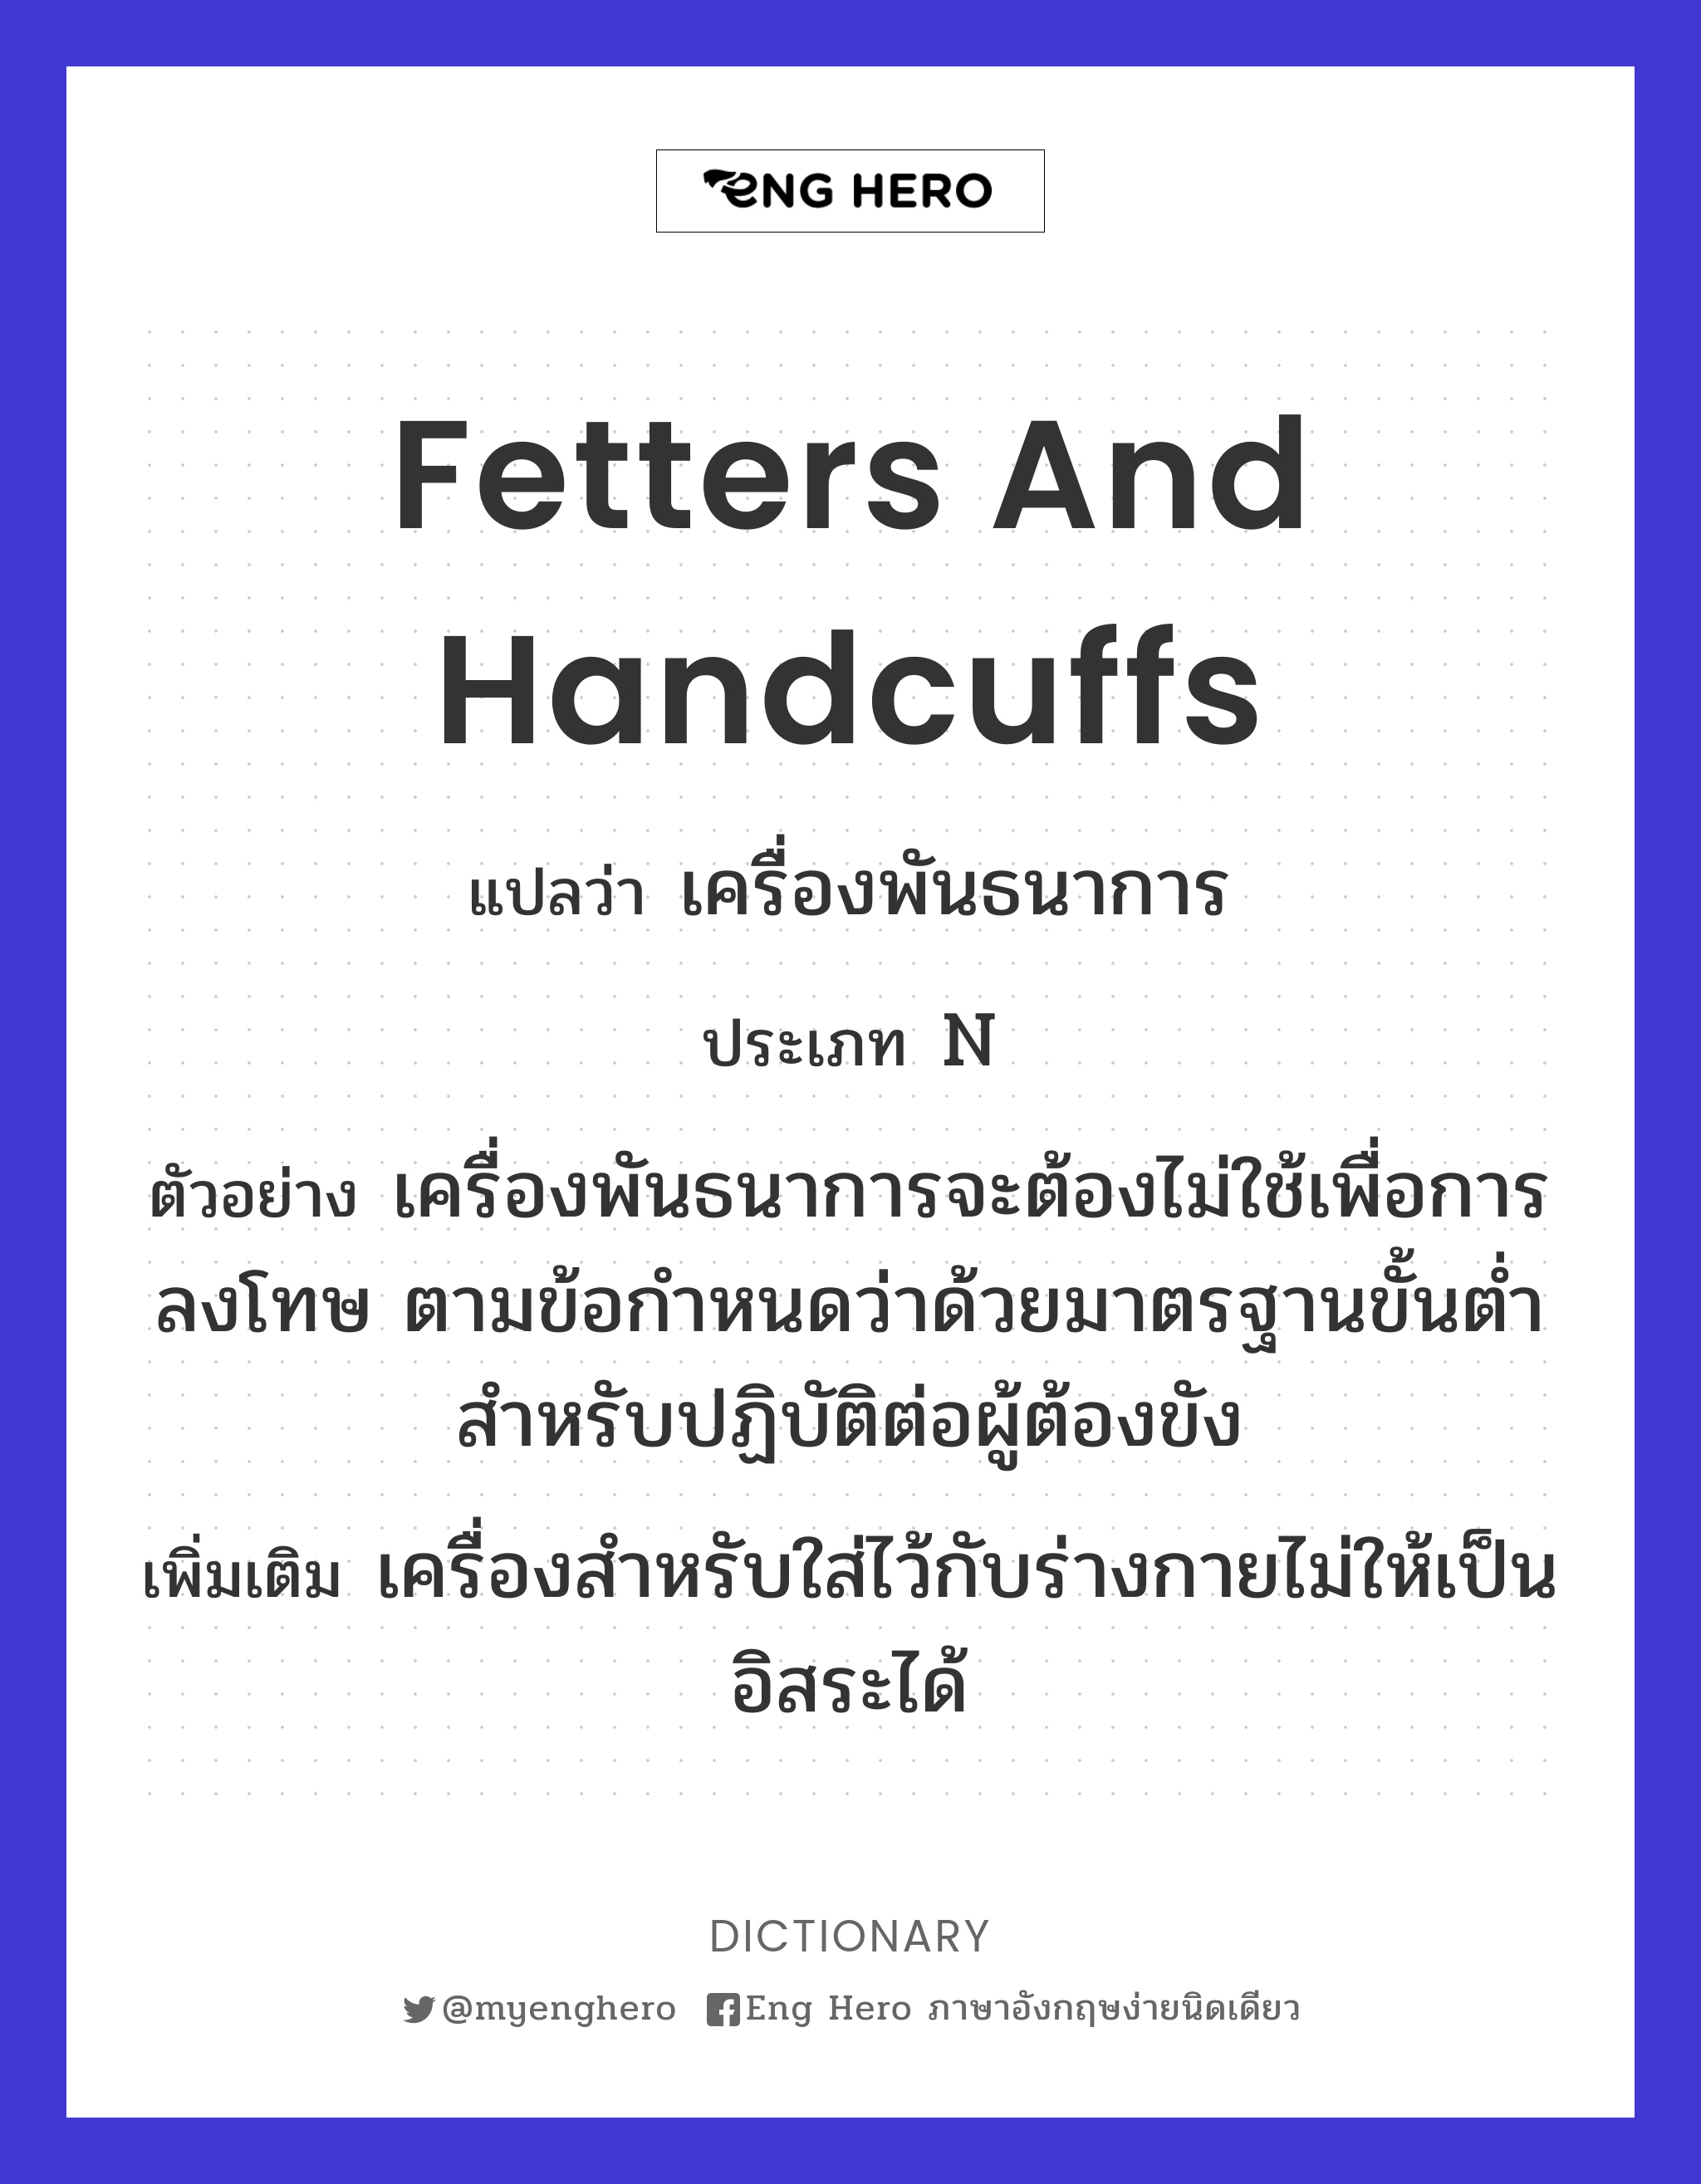 fetters and handcuffs